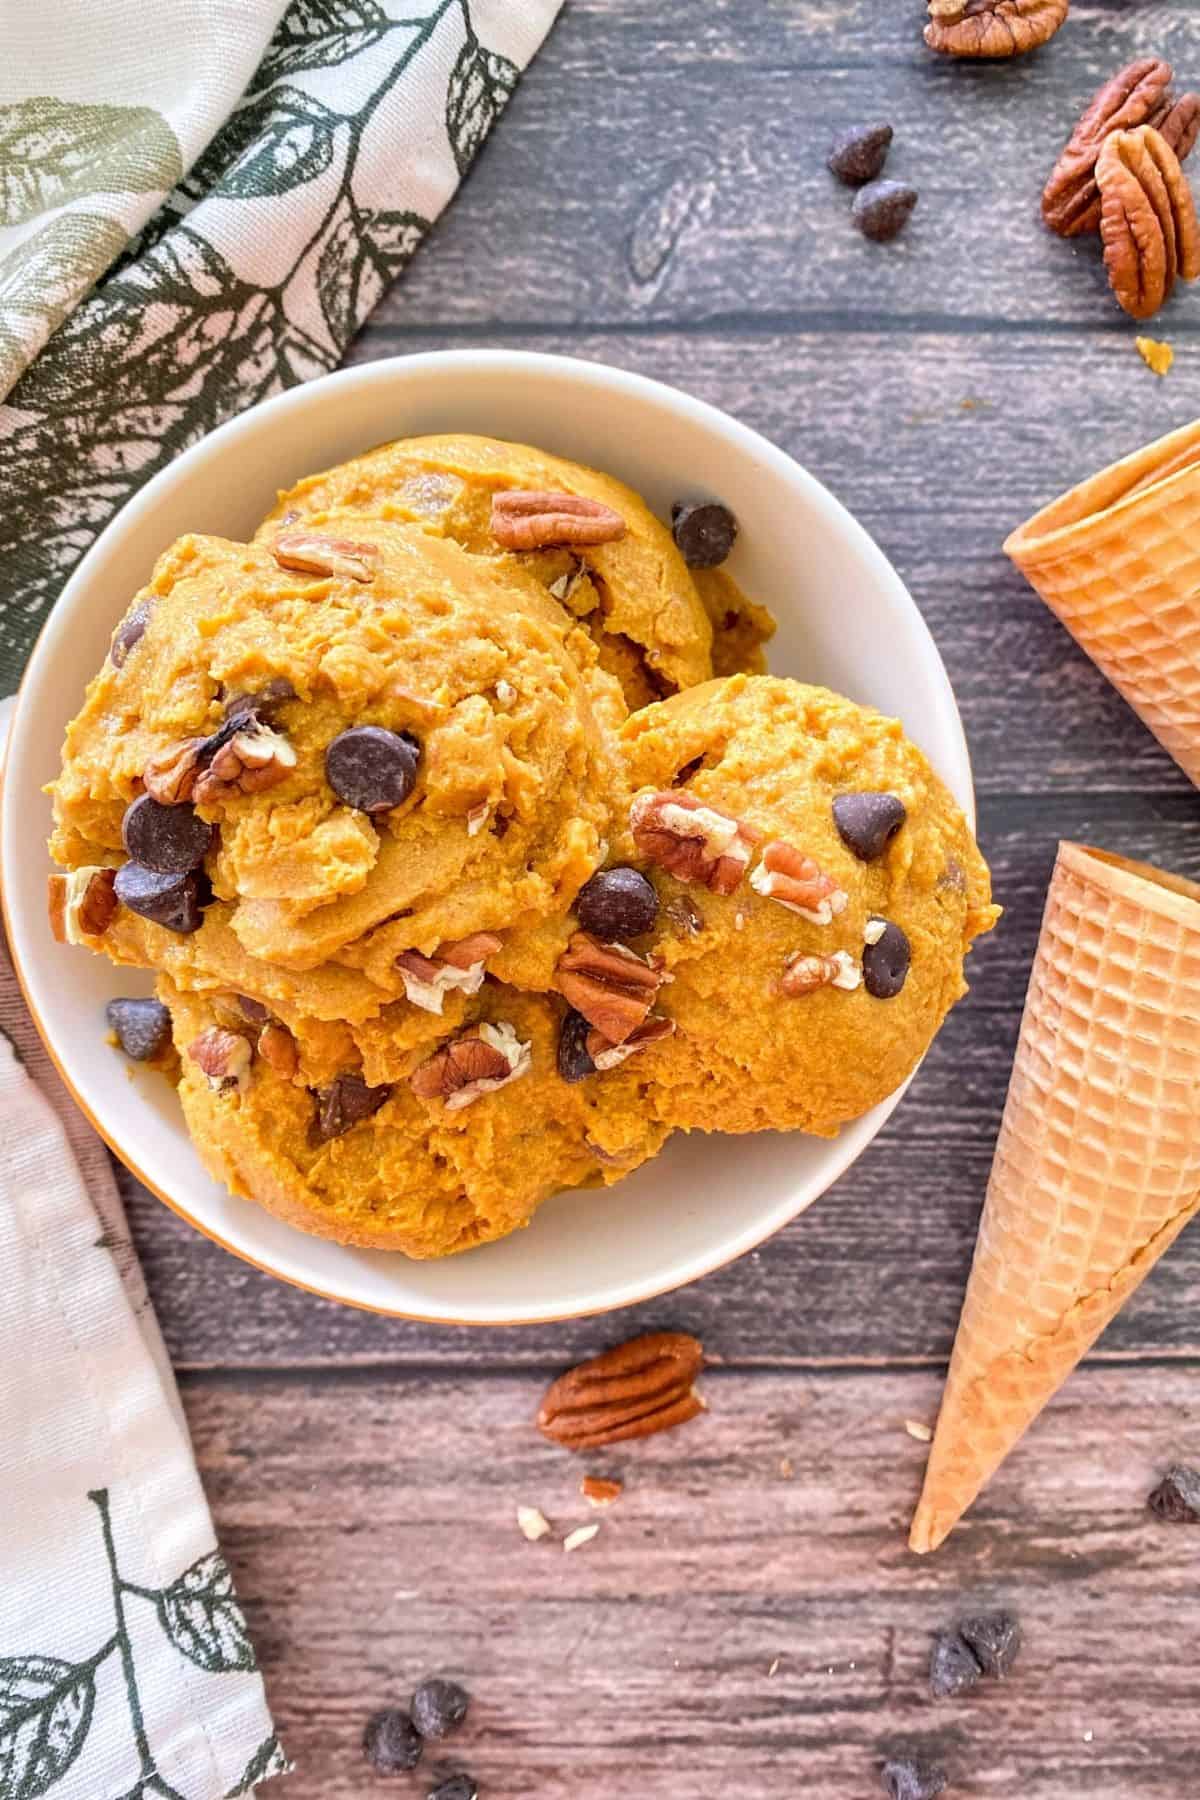 Bowl of pumpkin ice cream with chocolate chips and pecans beside it.